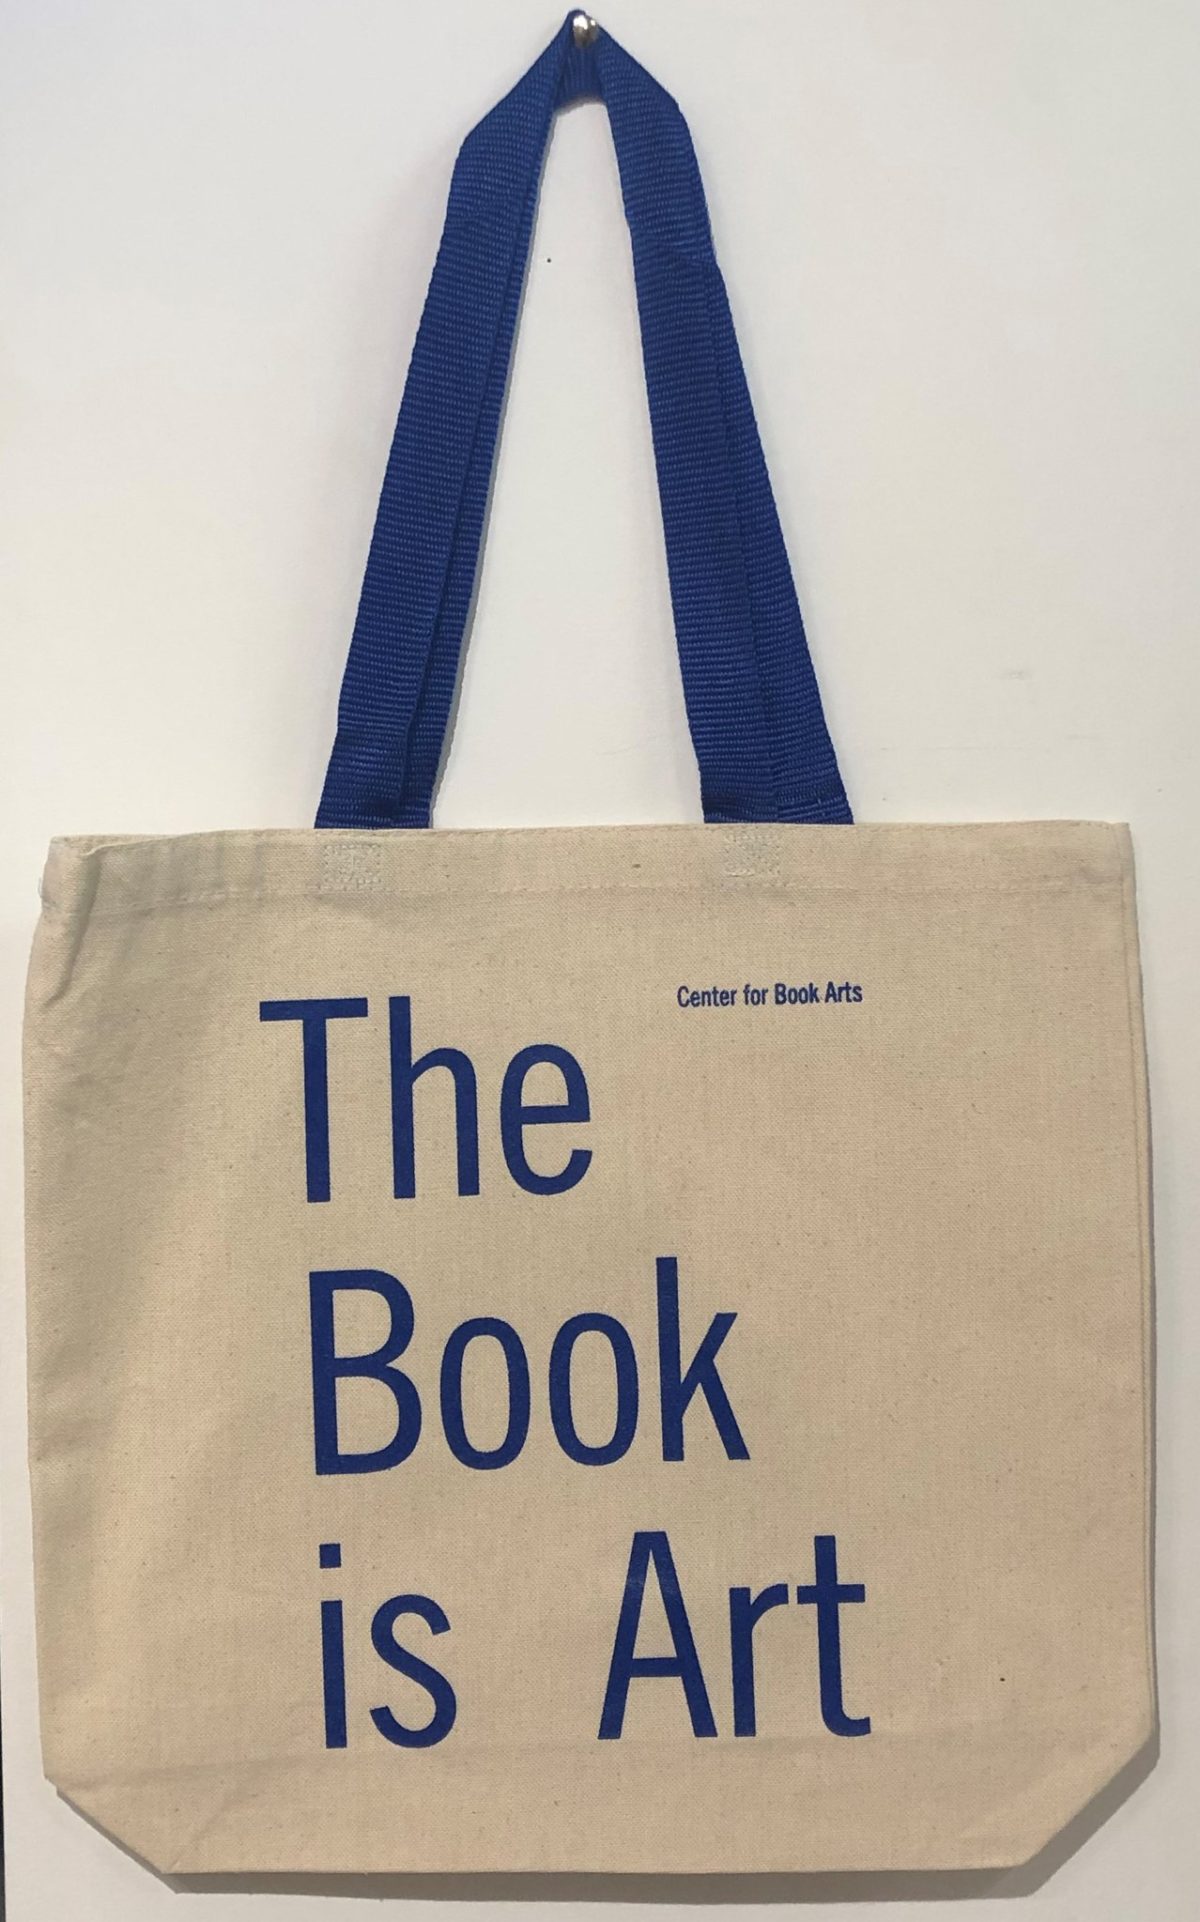 Natural Canvas Tote Bag with blue handles and text saying "The Book is Art"